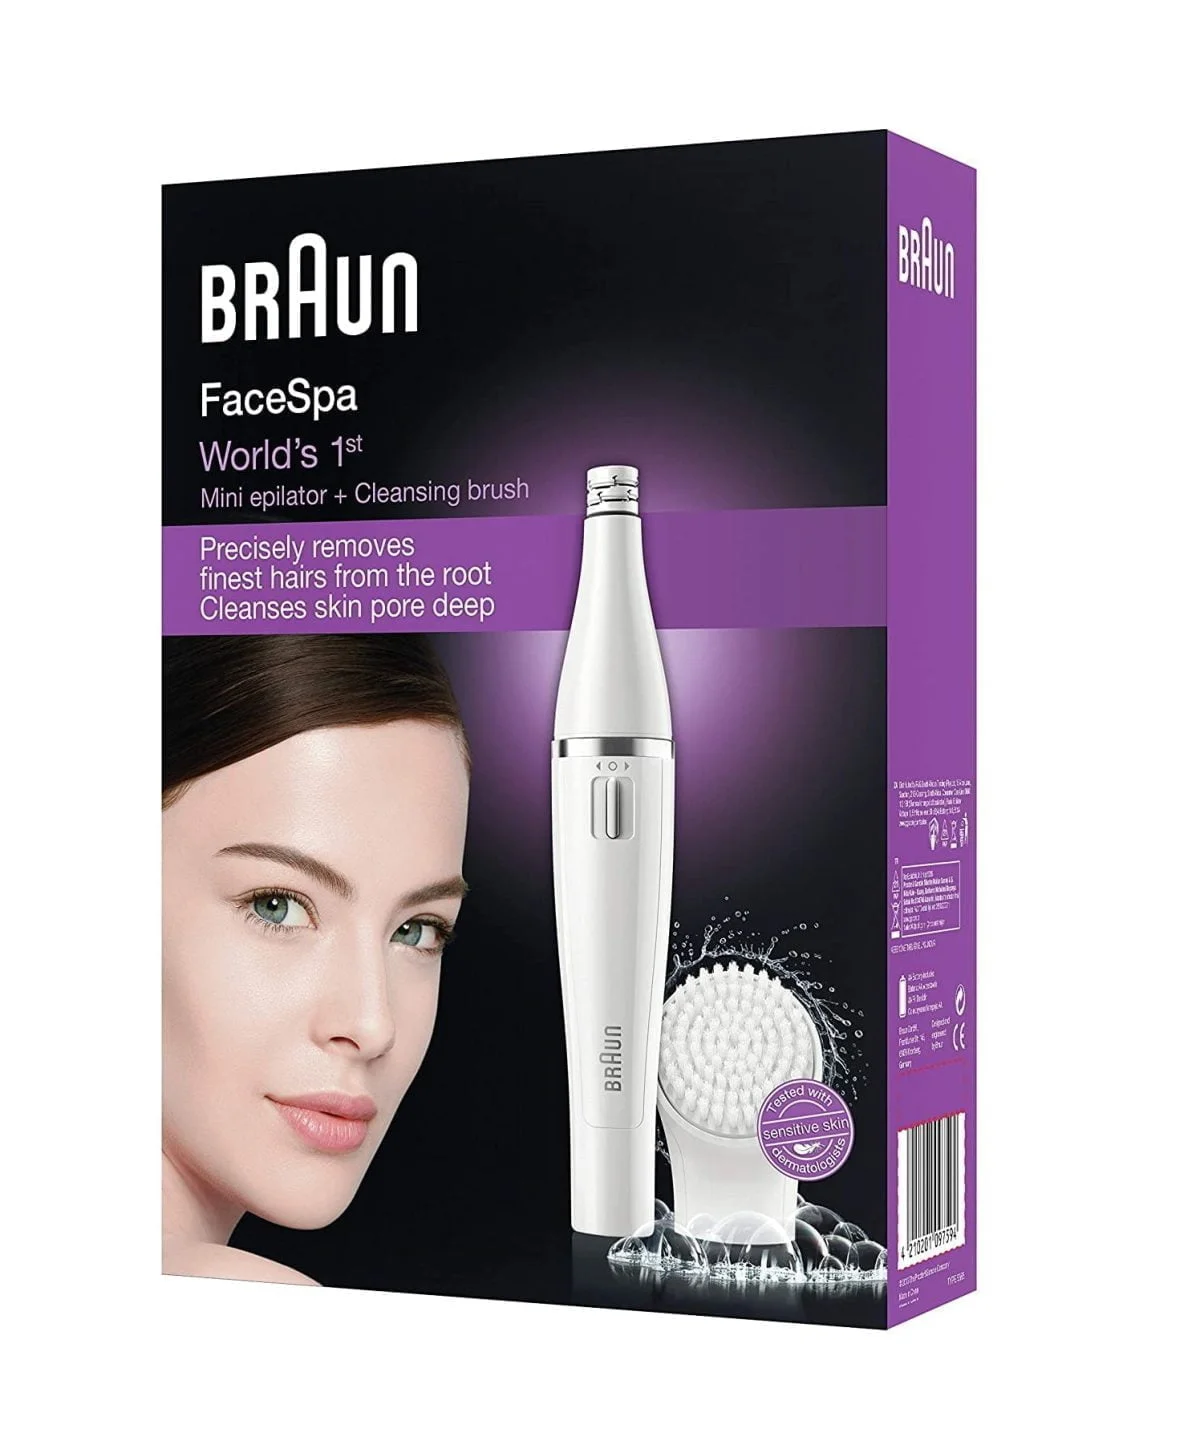 81U8Ykckdhl. Ac Sl1500 Braun &Amp;Lt;H1&Amp;Gt;Braun Face 810 Facial Epilator &Amp;Amp; Facial Cleansing Brush With Micro-Oscillations&Amp;Lt;/H1&Amp;Gt; &Amp;Lt;Ul Class=&Amp;Quot;A-Unordered-List A-Vertical A-Spacing-Mini&Amp;Quot;&Amp;Gt; &Amp;Lt;Li&Amp;Gt;&Amp;Lt;Span Class=&Amp;Quot;A-List-Item&Amp;Quot;&Amp;Gt; World’s First Facial Epilator And Cleansing Brush System &Amp;Lt;/Span&Amp;Gt;&Amp;Lt;/Li&Amp;Gt; &Amp;Lt;Li&Amp;Gt;&Amp;Lt;Span Class=&Amp;Quot;A-List-Item&Amp;Quot;&Amp;Gt; Facial Epilator: Sleek And Compact Design For Precise Epilation. 10 Micro-Openings Catch Even The Finest Hairs (0.02Mm) &Amp;Lt;/Span&Amp;Gt;&Amp;Lt;/Li&Amp;Gt; &Amp;Lt;Li&Amp;Gt;&Amp;Lt;Span Class=&Amp;Quot;A-List-Item&Amp;Quot;&Amp;Gt; Facial Cleansing Brush: Gently Cleanse Skin Pore-Deep With Micro-Oscillations. Tested With Dermatologists For Daily Use On Sensitive Skin &Amp;Lt;/Span&Amp;Gt;&Amp;Lt;/Li&Amp;Gt; &Amp;Lt;Li&Amp;Gt;&Amp;Lt;Span Class=&Amp;Quot;A-List-Item&Amp;Quot;&Amp;Gt; Gentle Epilation For Smooth Skin Up To 4 Weeks &Amp;Lt;/Span&Amp;Gt;&Amp;Lt;/Li&Amp;Gt; &Amp;Lt;Li&Amp;Gt;&Amp;Lt;Span Class=&Amp;Quot;A-List-Item&Amp;Quot;&Amp;Gt; Ergonomic Design, Comfortable Grip &Amp;Lt;/Span&Amp;Gt;&Amp;Lt;/Li&Amp;Gt; &Amp;Lt;/Ul&Amp;Gt; Braun Face 810 Facial Epilator Braun Face 810 Facial Epilator And Facial Cleansing Brush With Micro-Oscillations